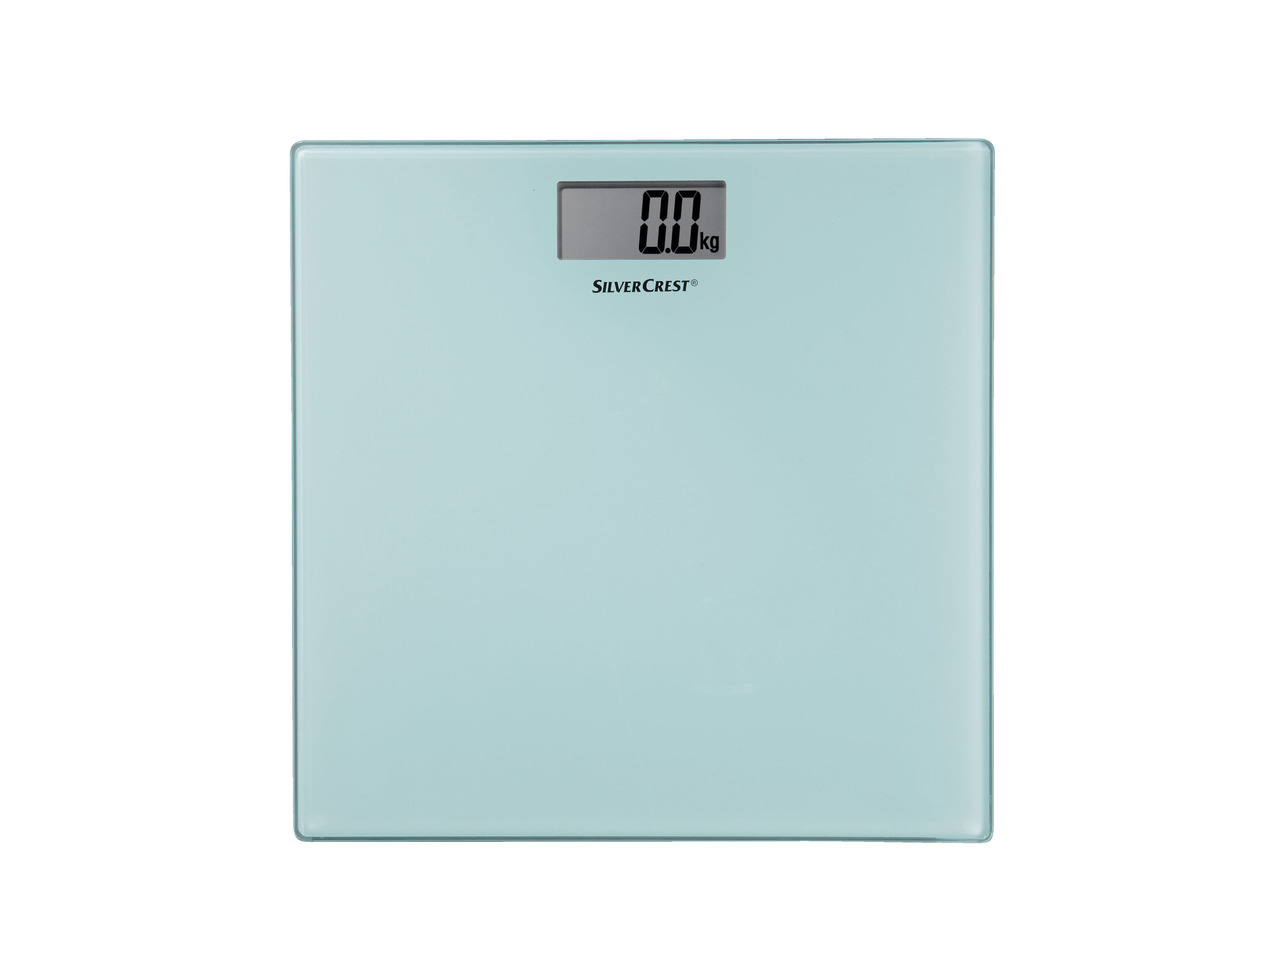 SILVERCREST PERSONAL CARE Bathroom Scales